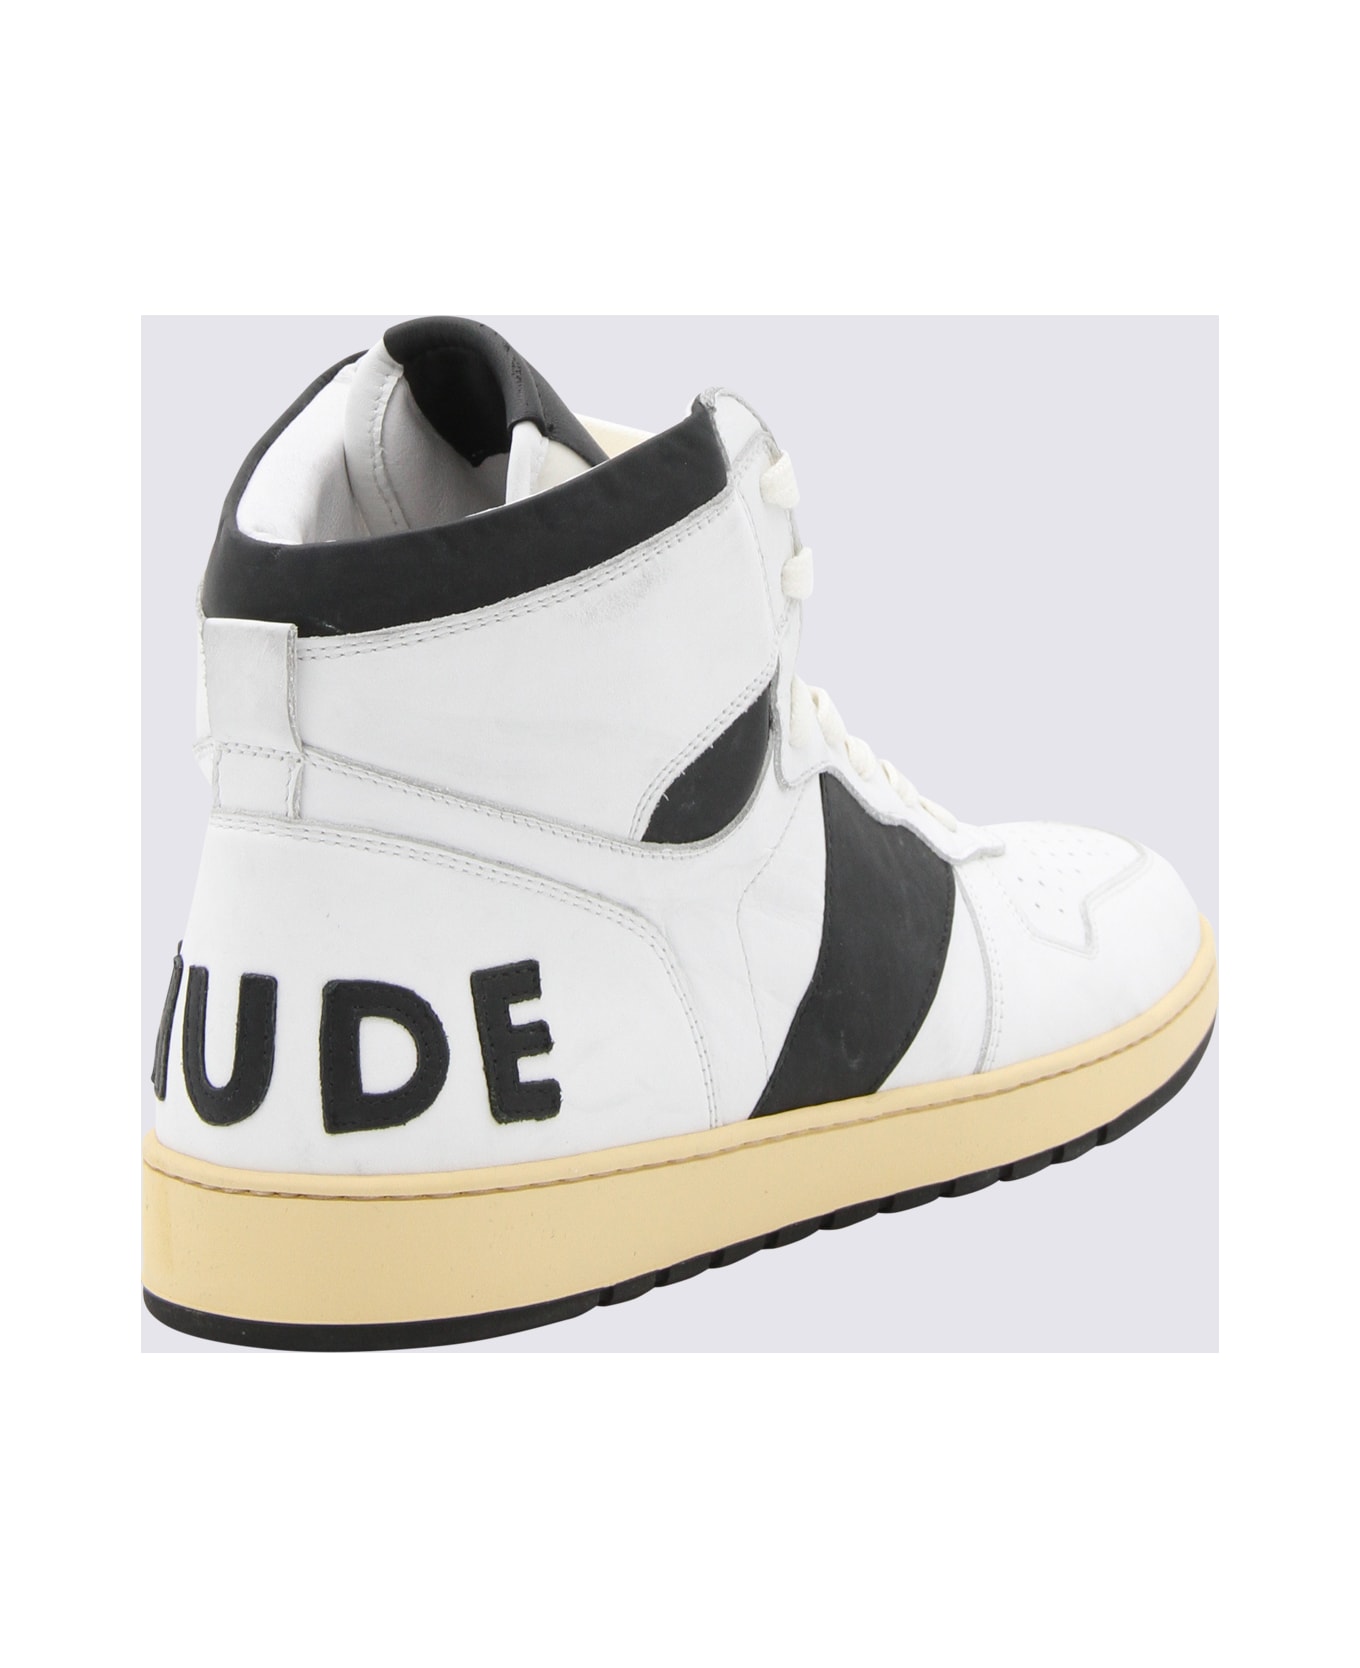 Rhude White Leather Rhecess Sneakers - White